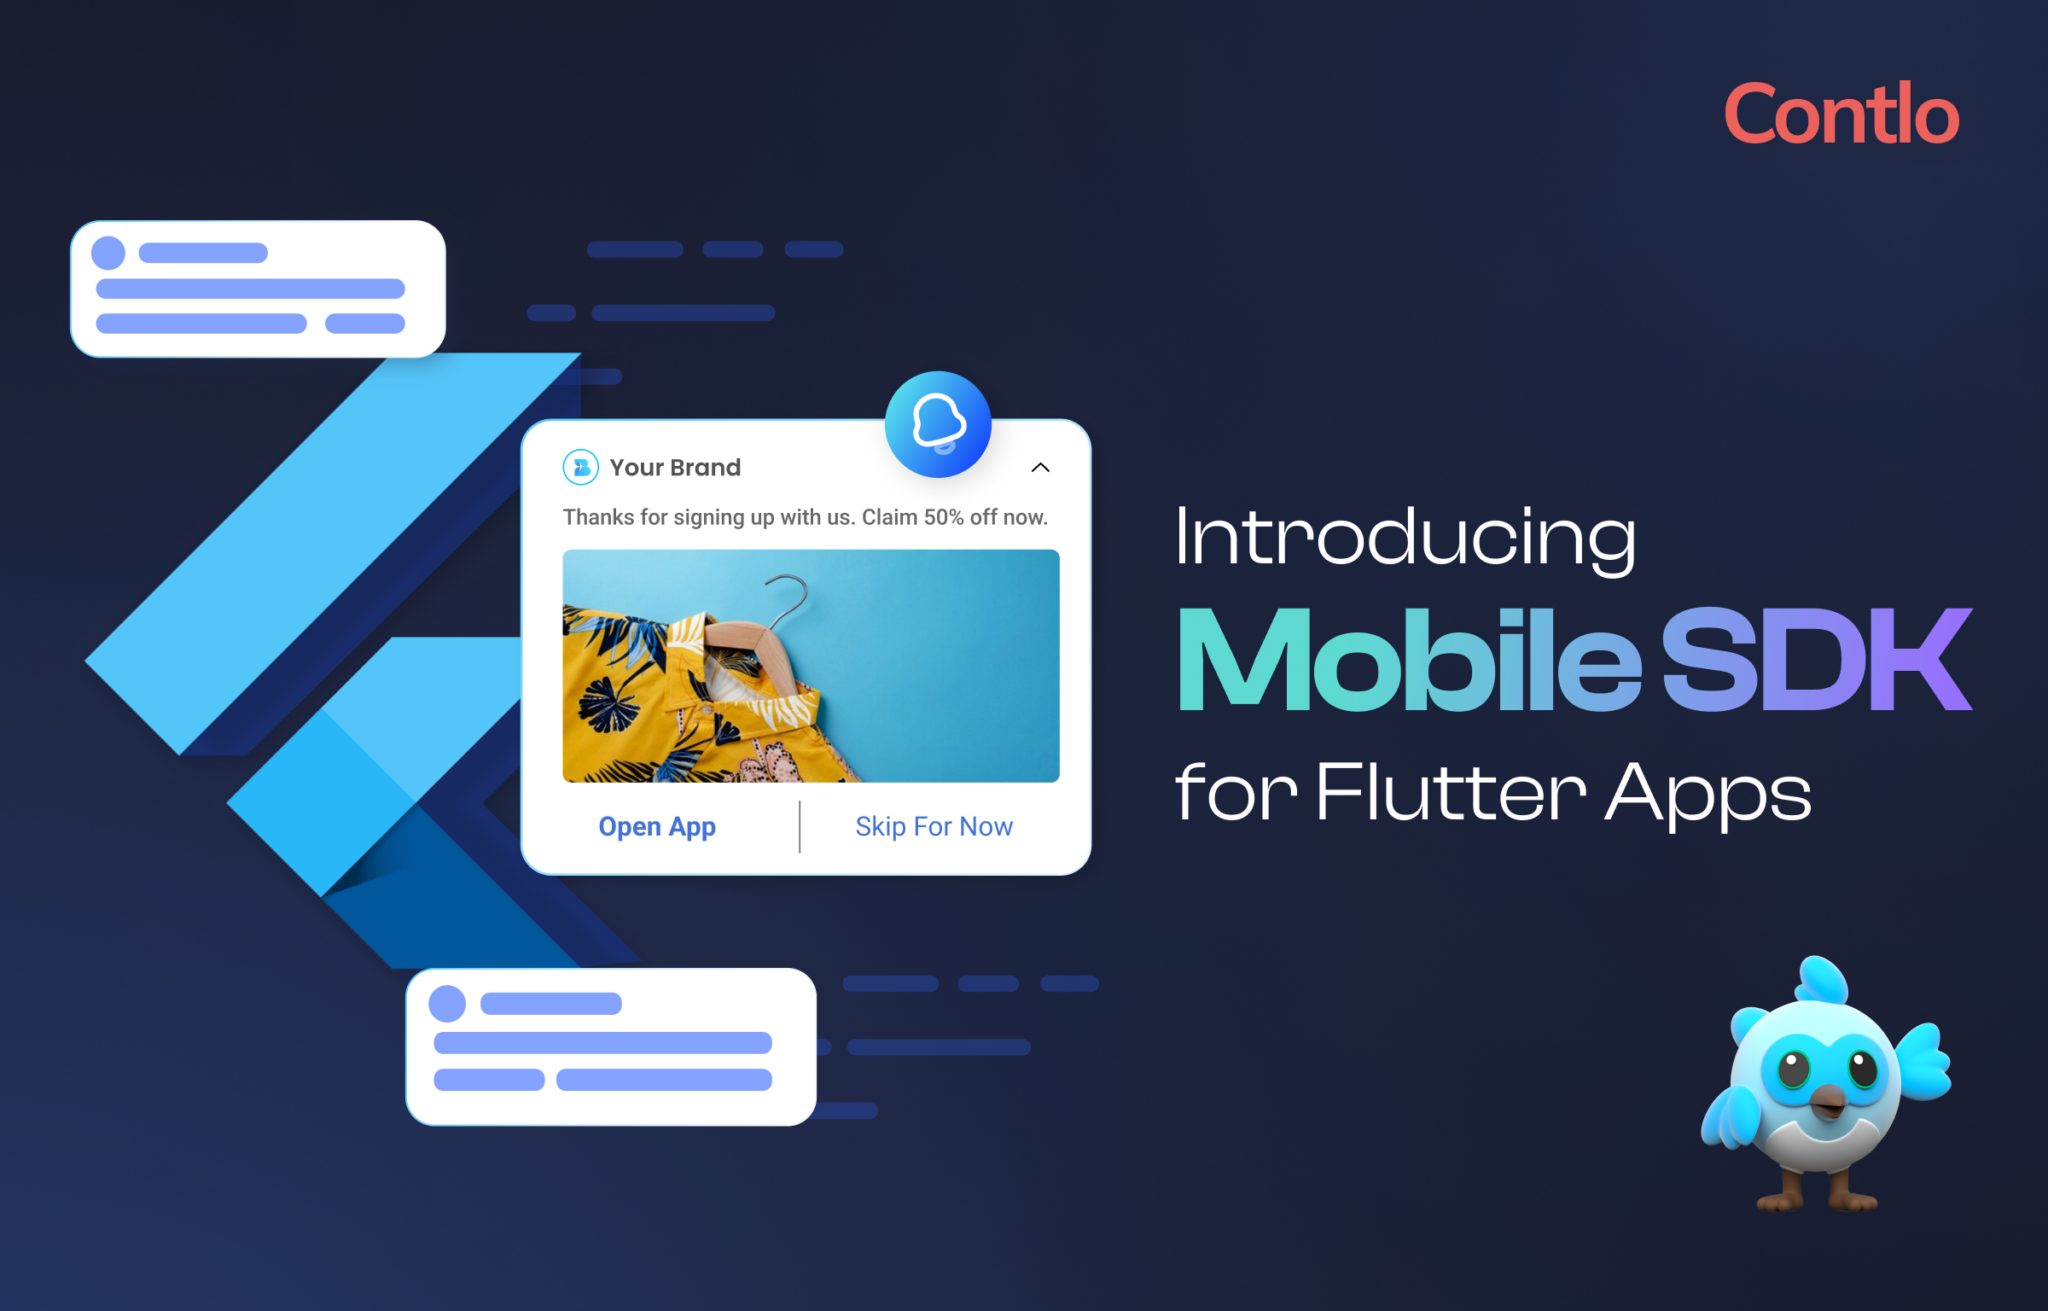 product-update: Introducing Mobile SDK for flutter apps